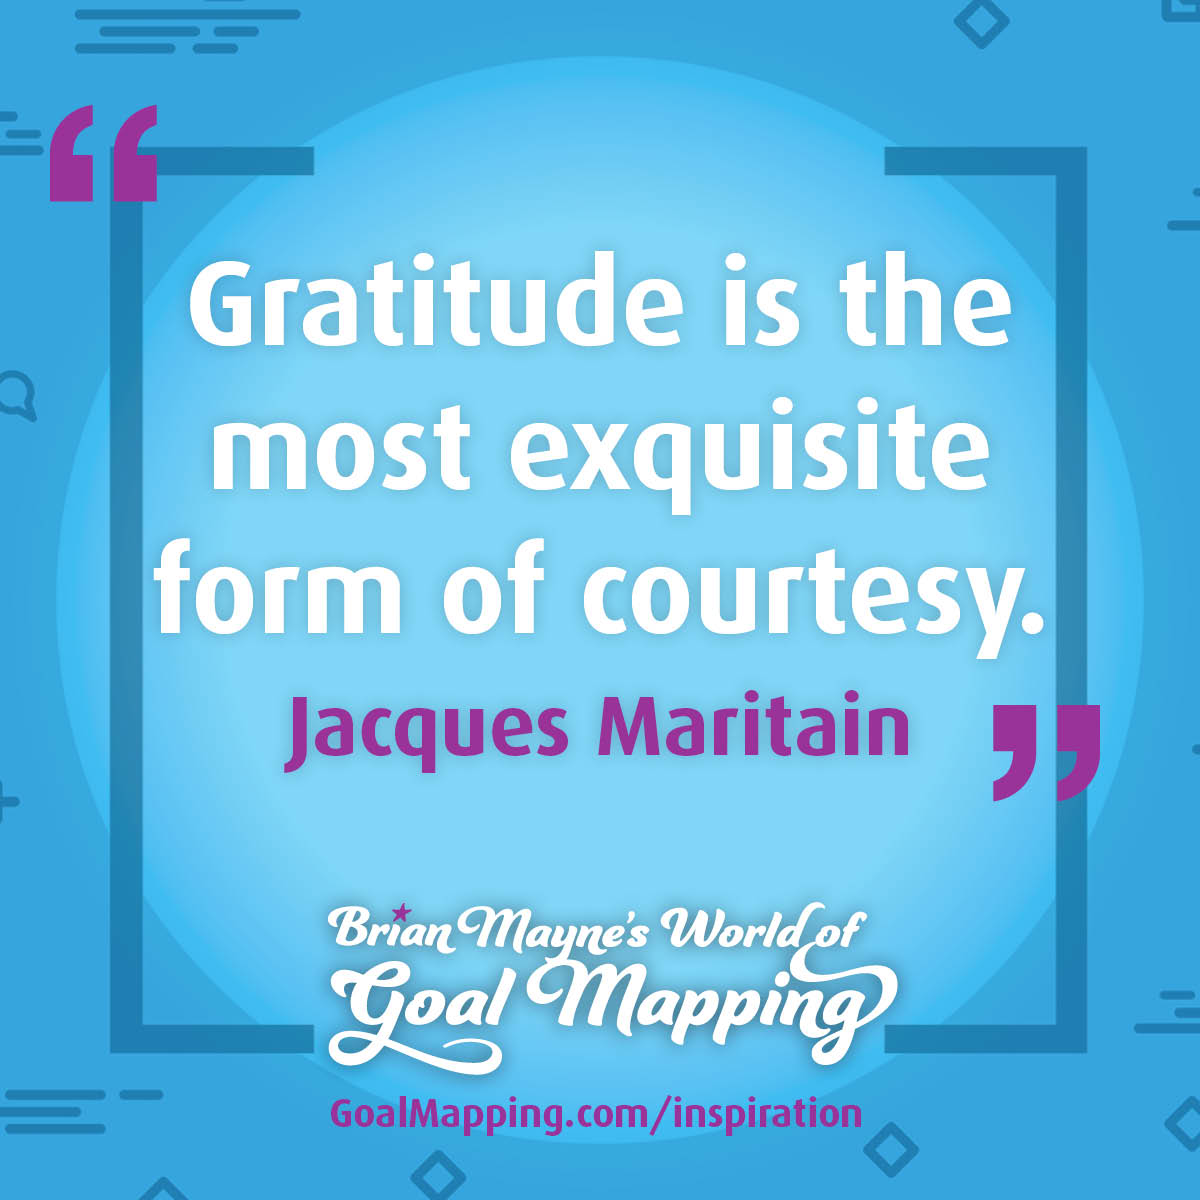 "Gratitude is the most exquisite form of courtesy." Jacques Maritain